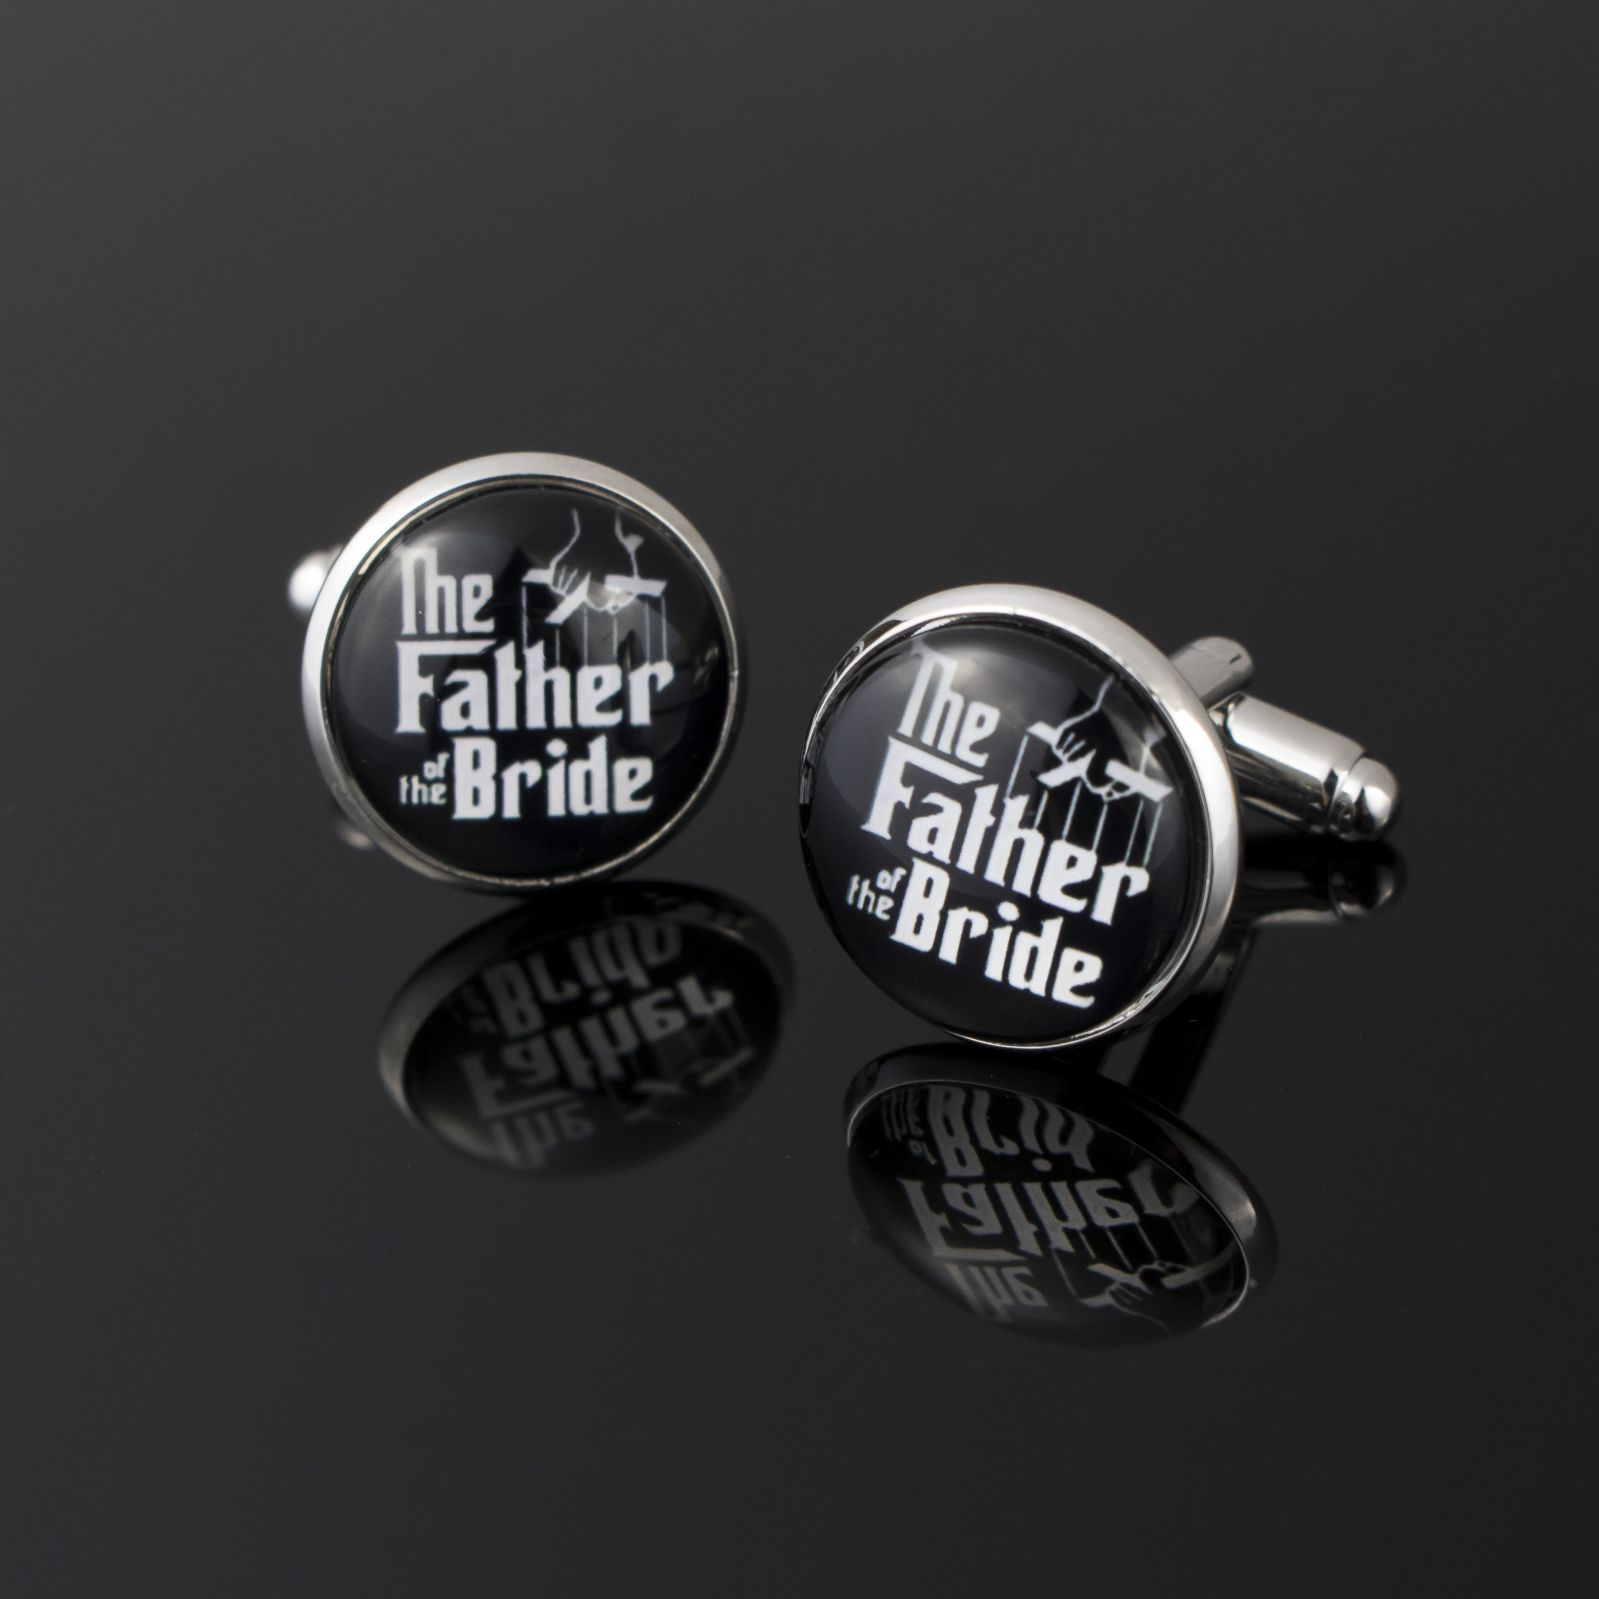 round black cufflinks resembling the look of the godfather movie cover with the father of the bride words written in white